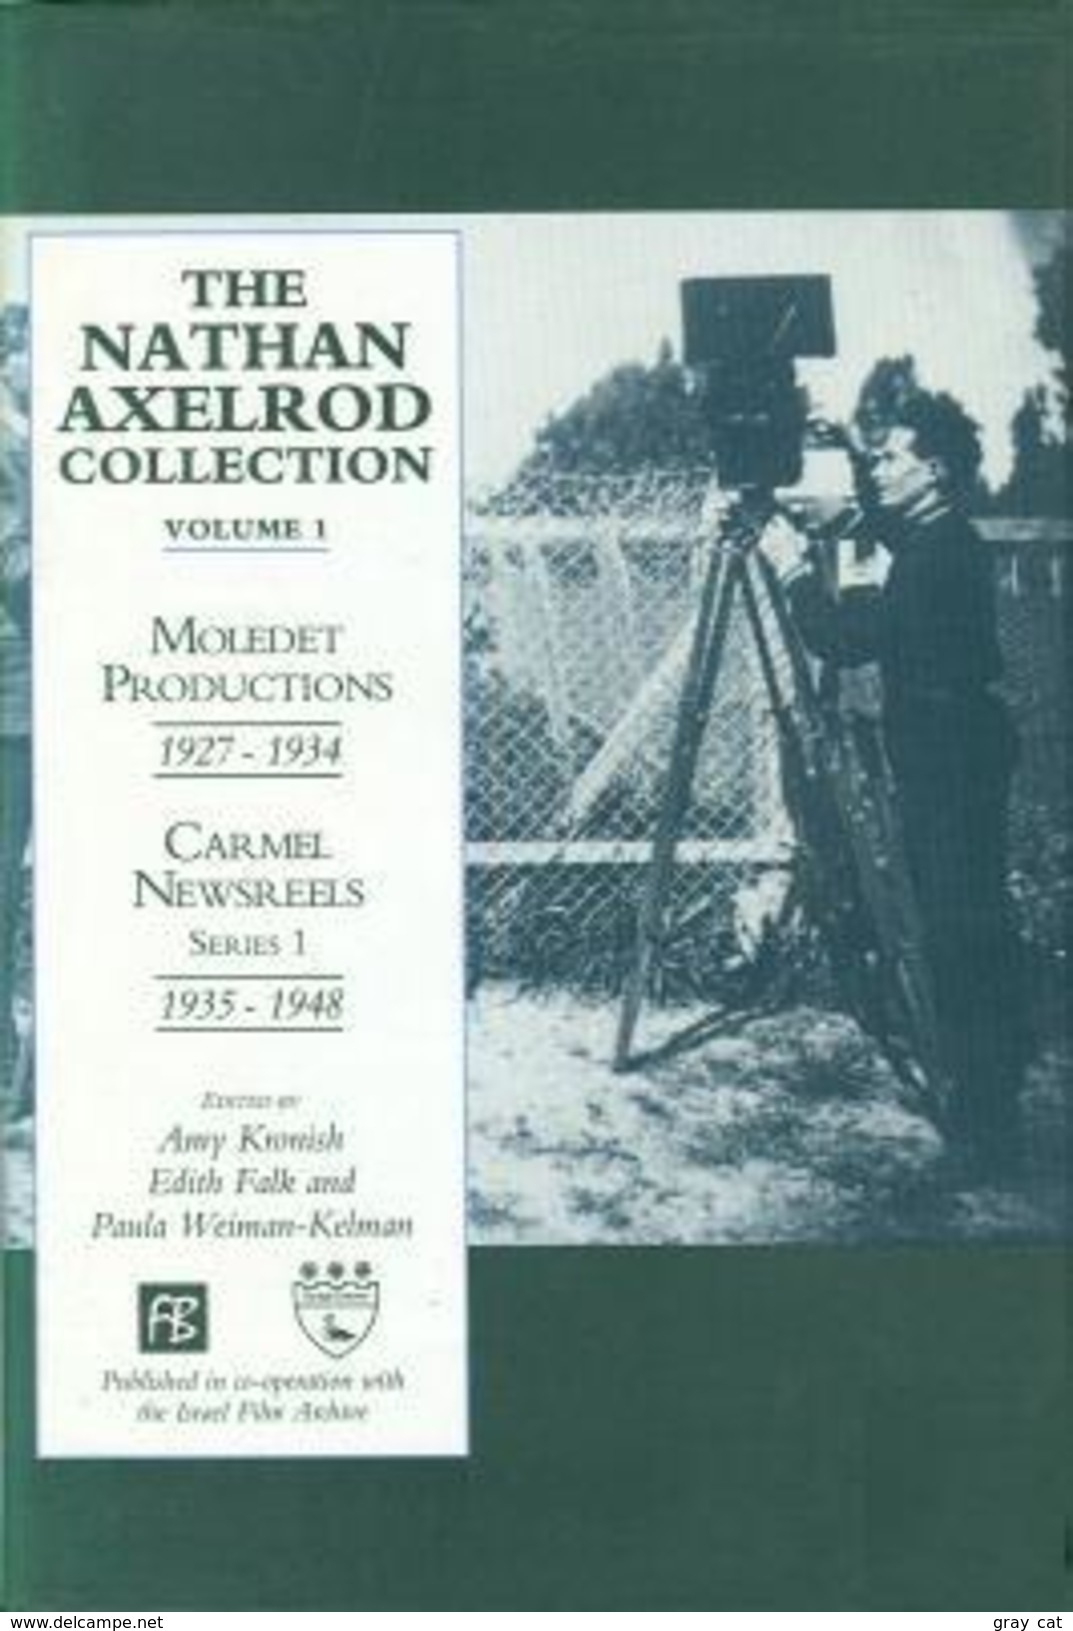 The Nathan Axelrod Collection: Moledet Productions, 1927-34, Carmel Newsreels, Series 1, 1935-48 Volume. 1 By Kronish, A - Fotografia